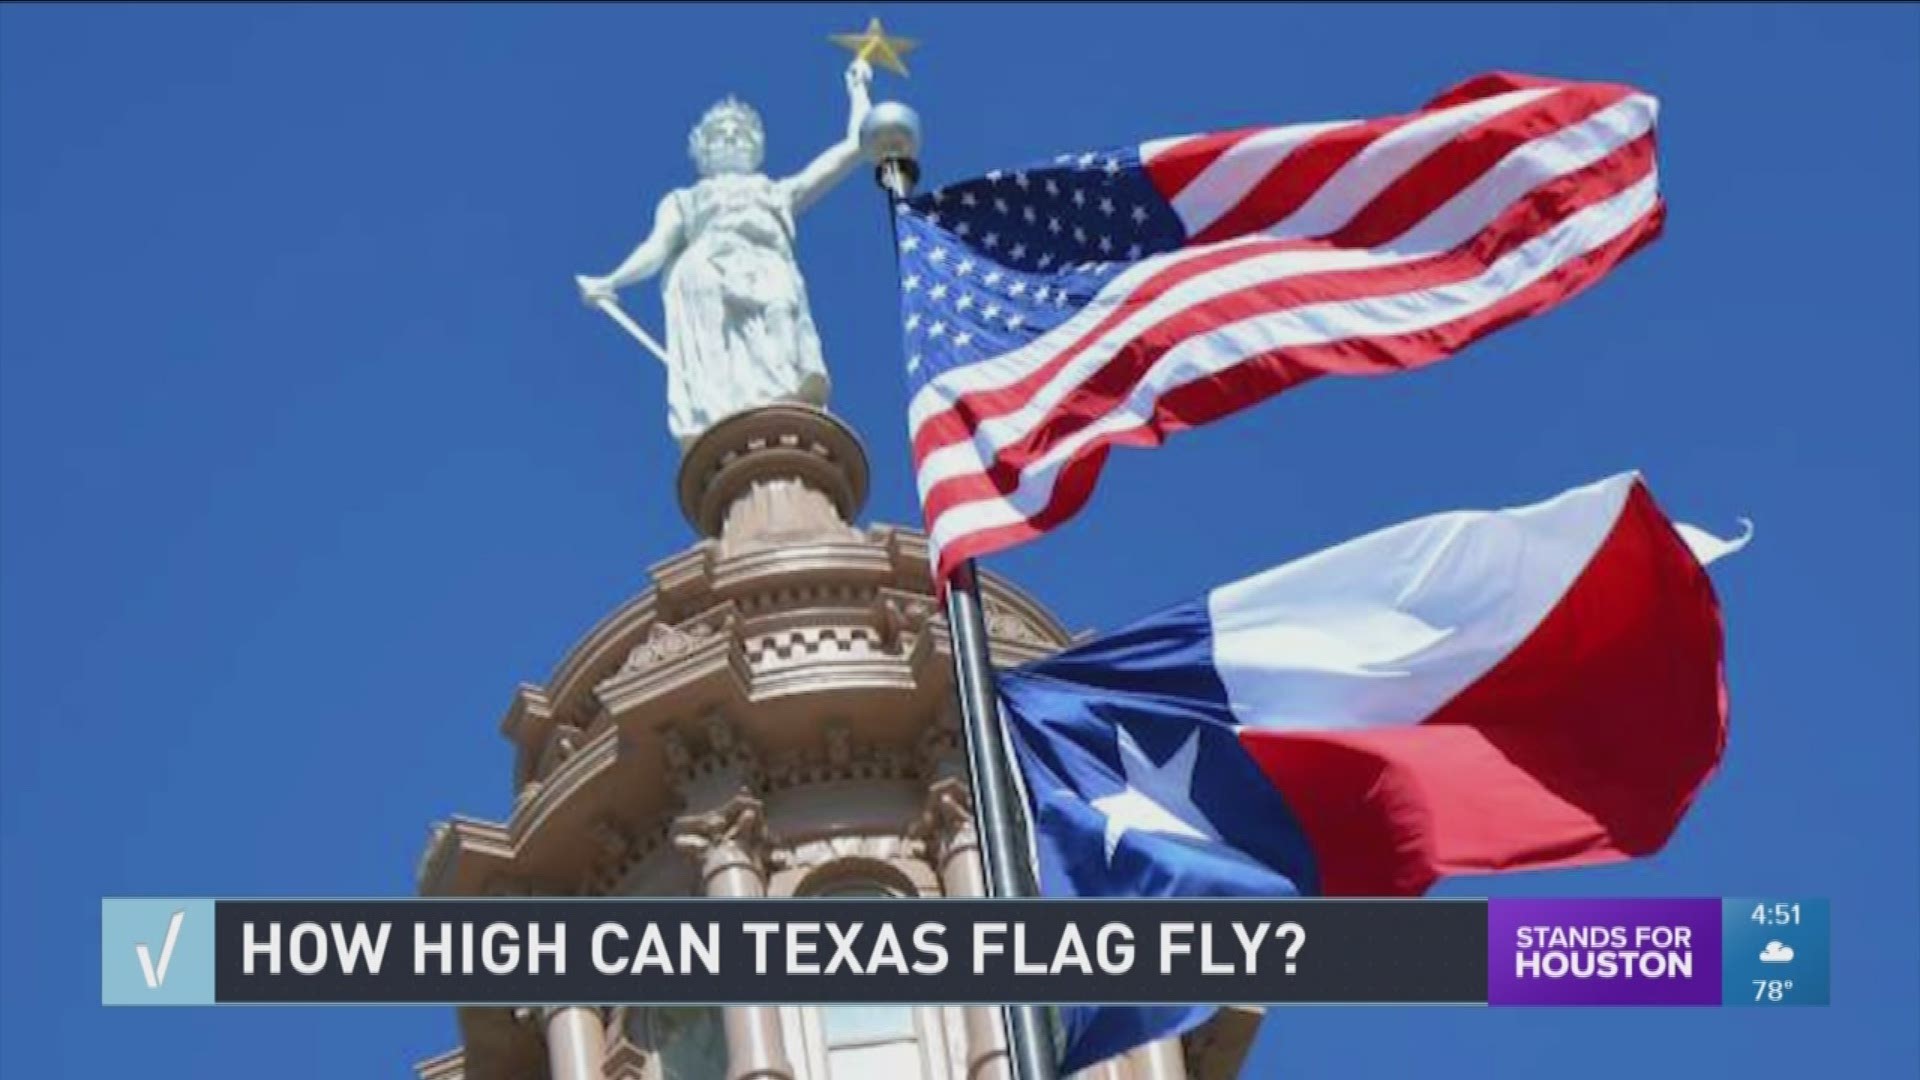 Is the Texas flag different from other state flags when it comes to height? We set out to verify.